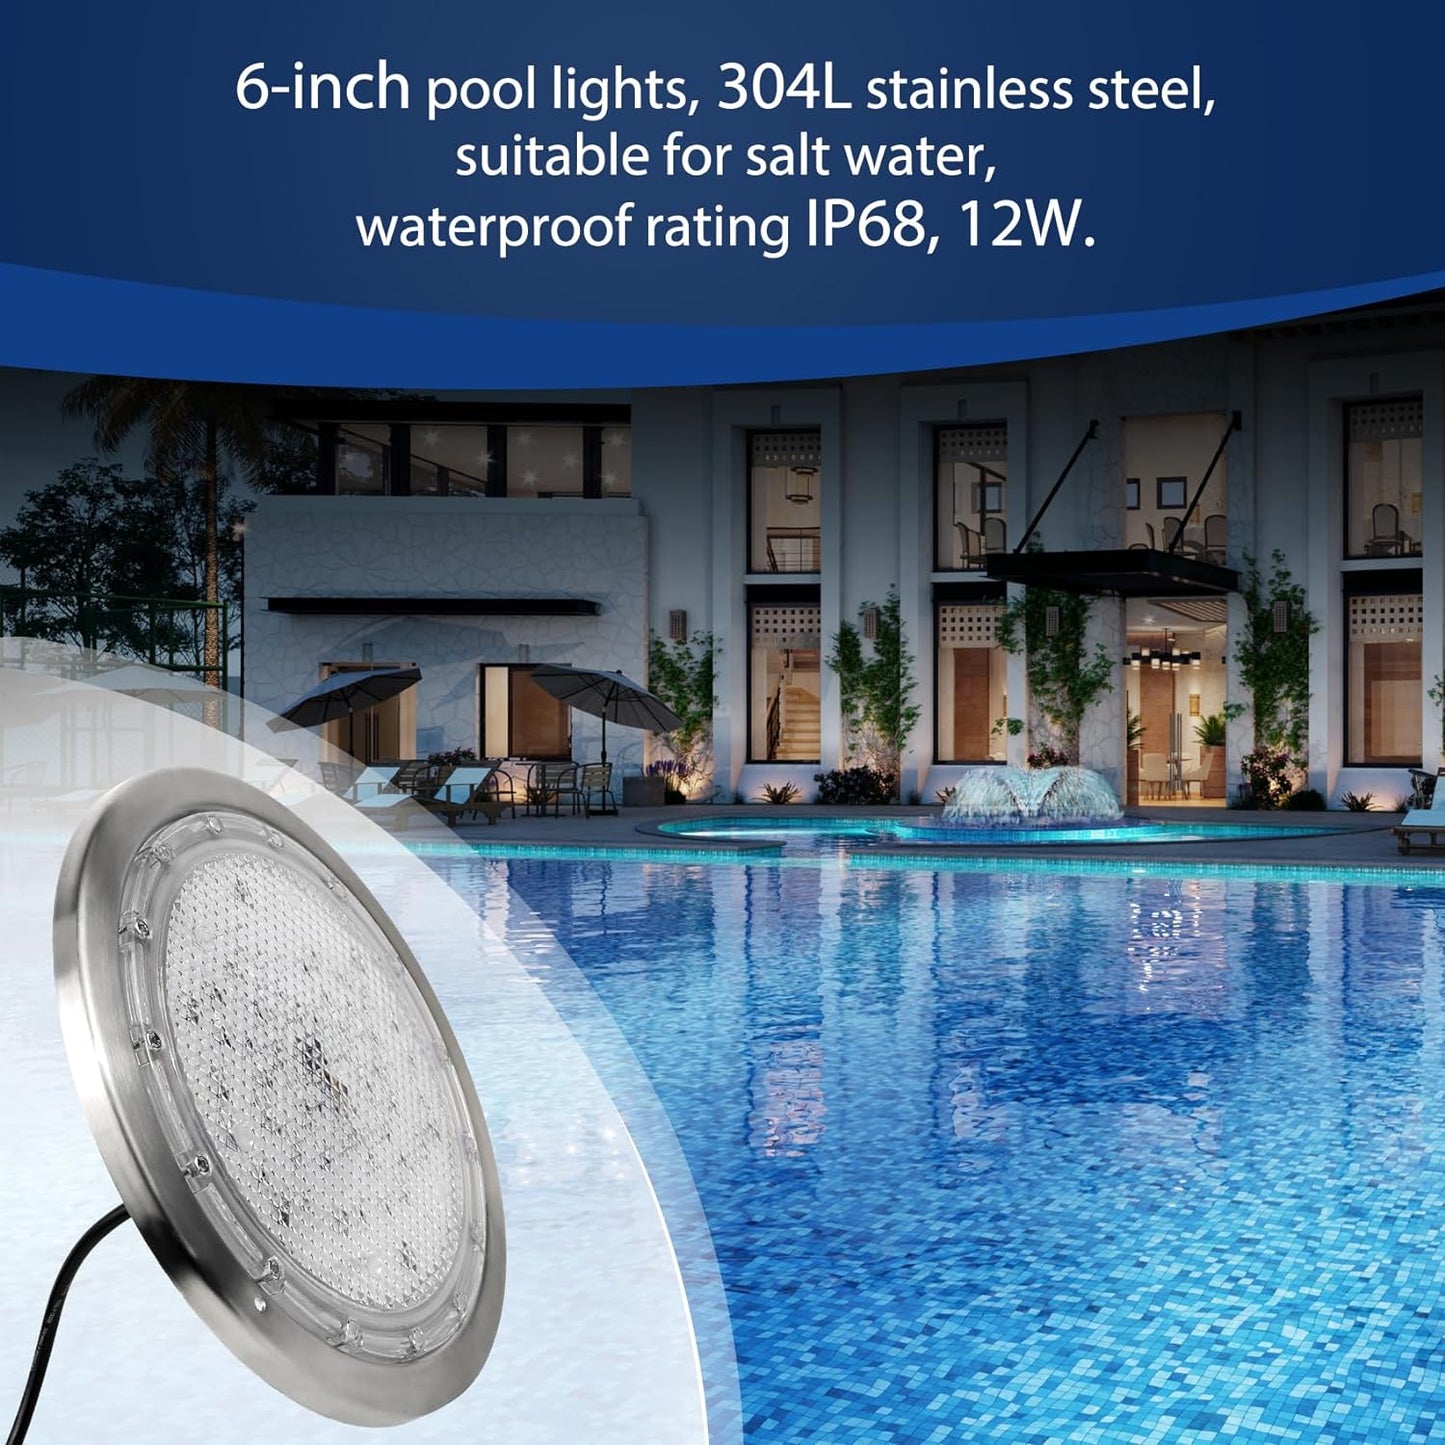 LED RGBW 6 Inch AC120V Pool Lights for Inground Pool, Led Lights for Inground Pool with 50 Foot Cord for Wet Niche, Submersible Led Lights for Pool (6 Inch 50FT)